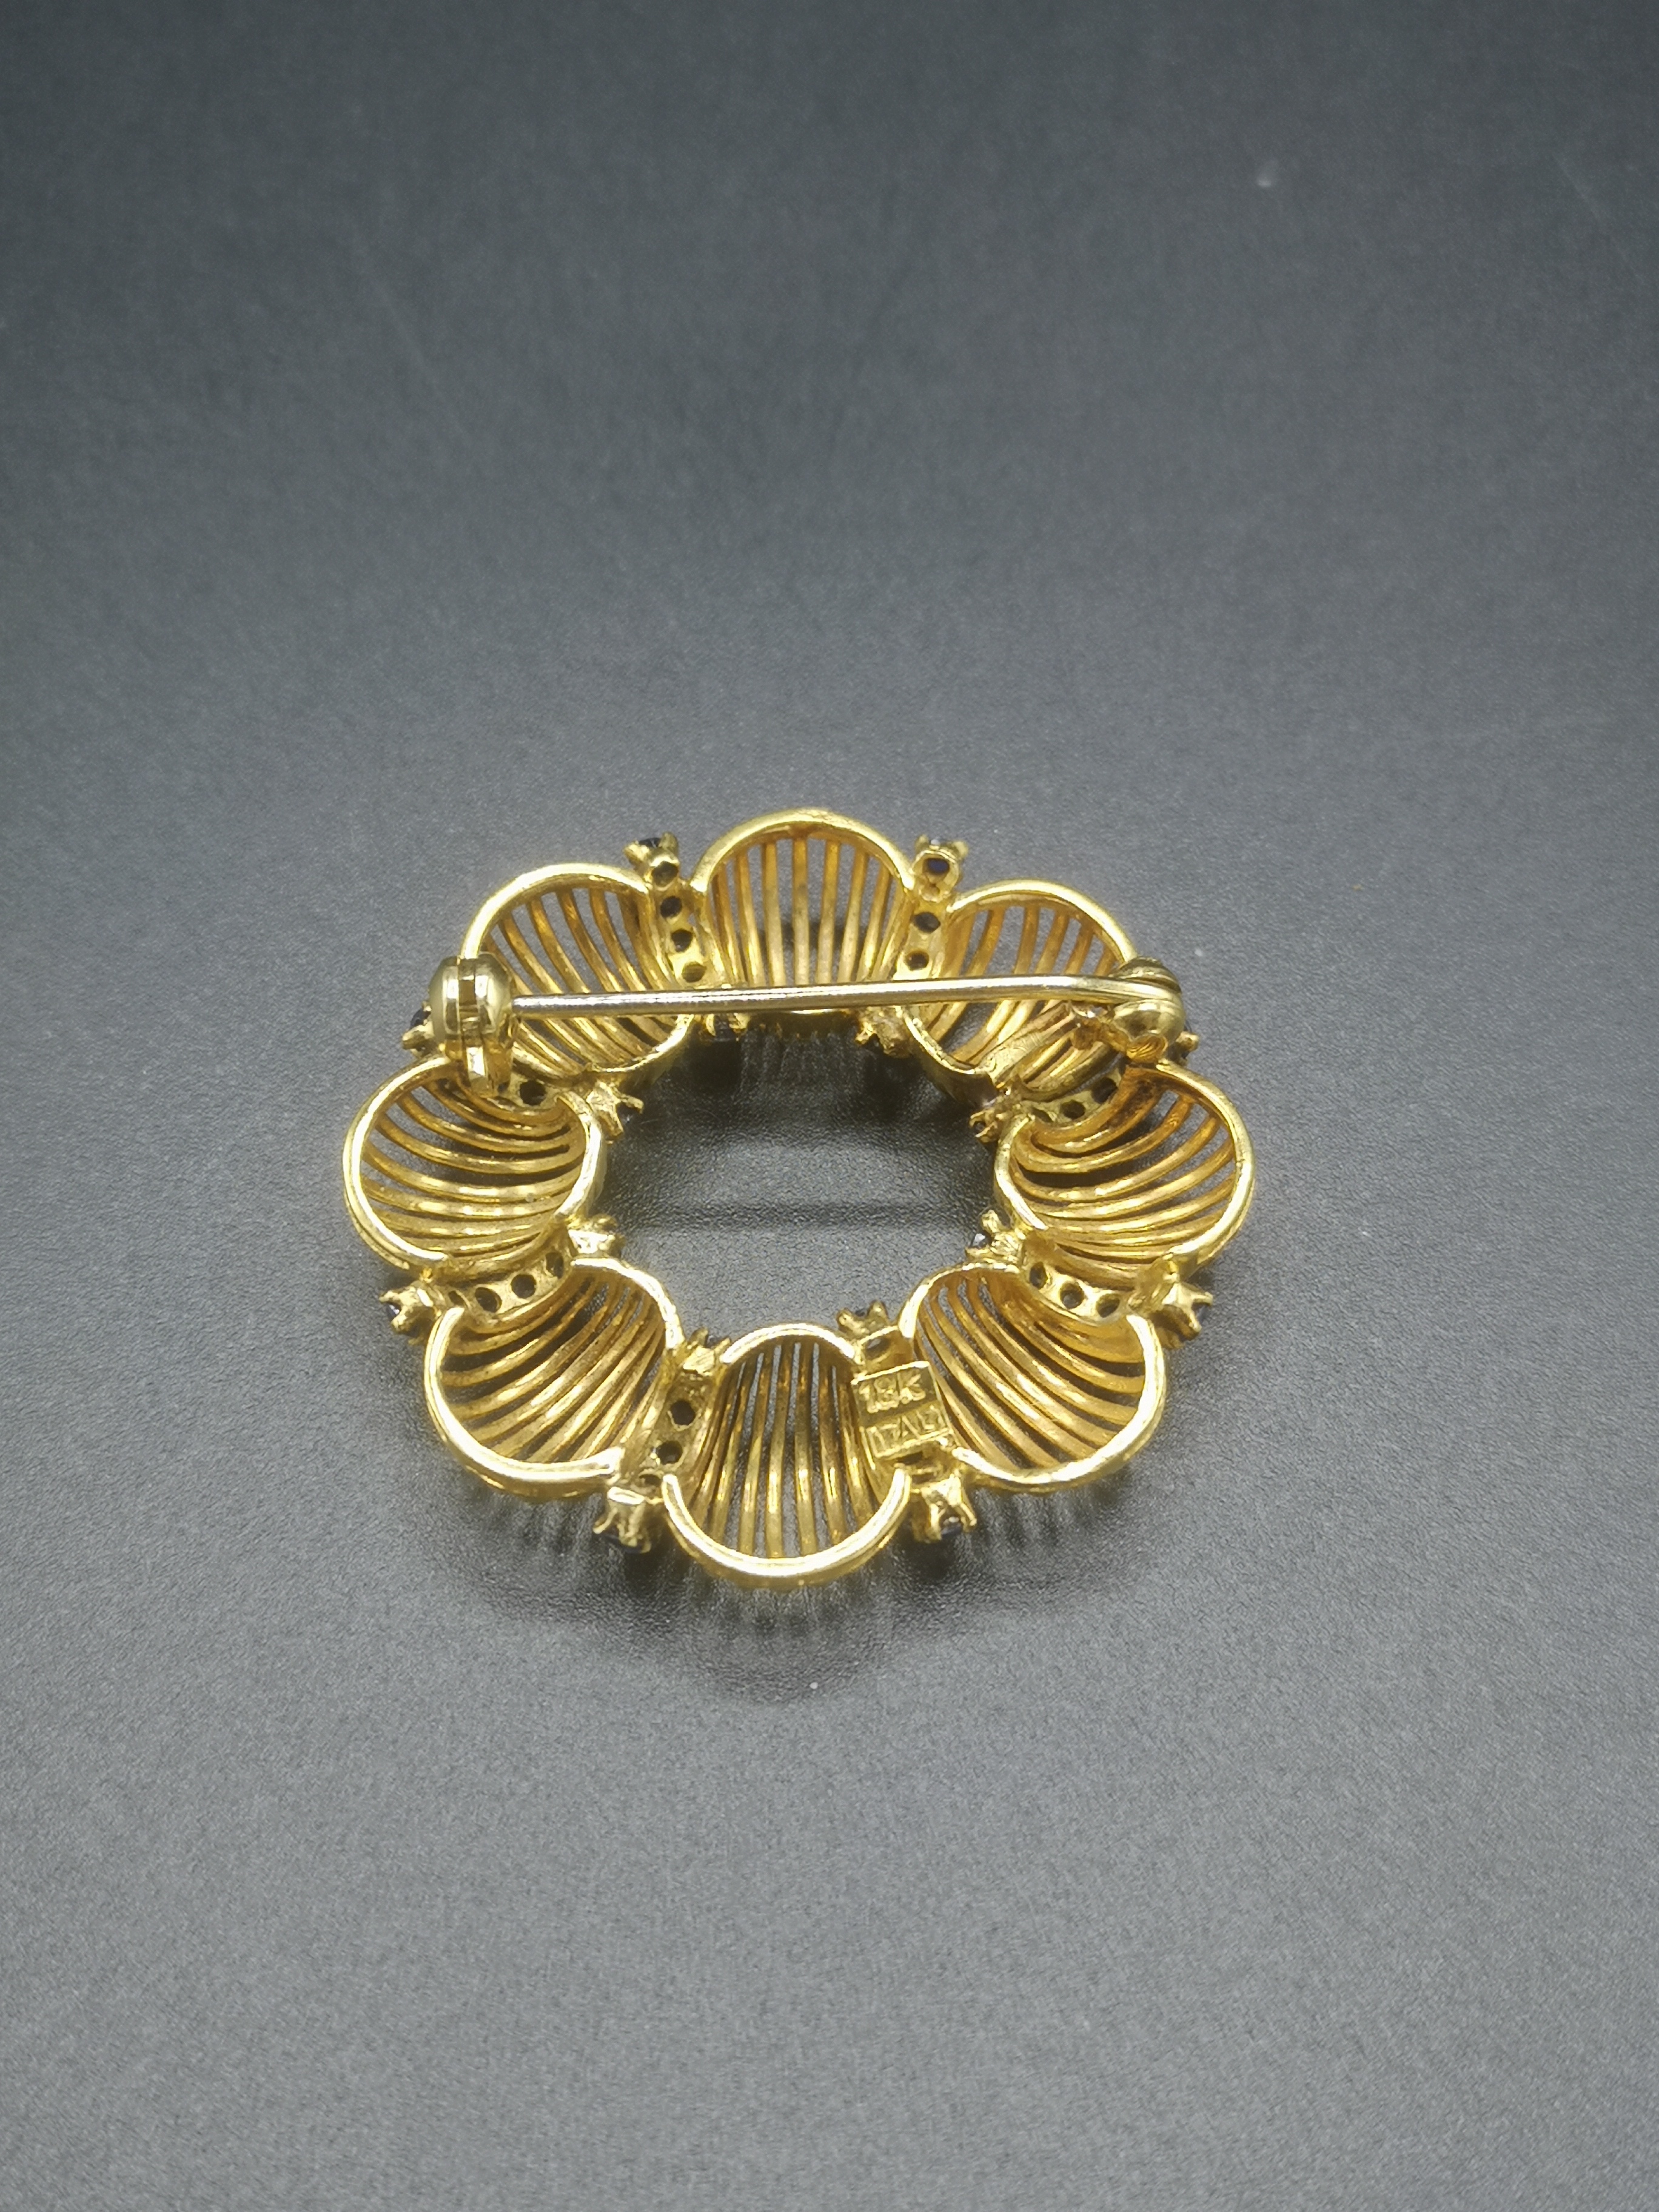 Italian 18ct gold brooch set with sapphires - Image 3 of 4